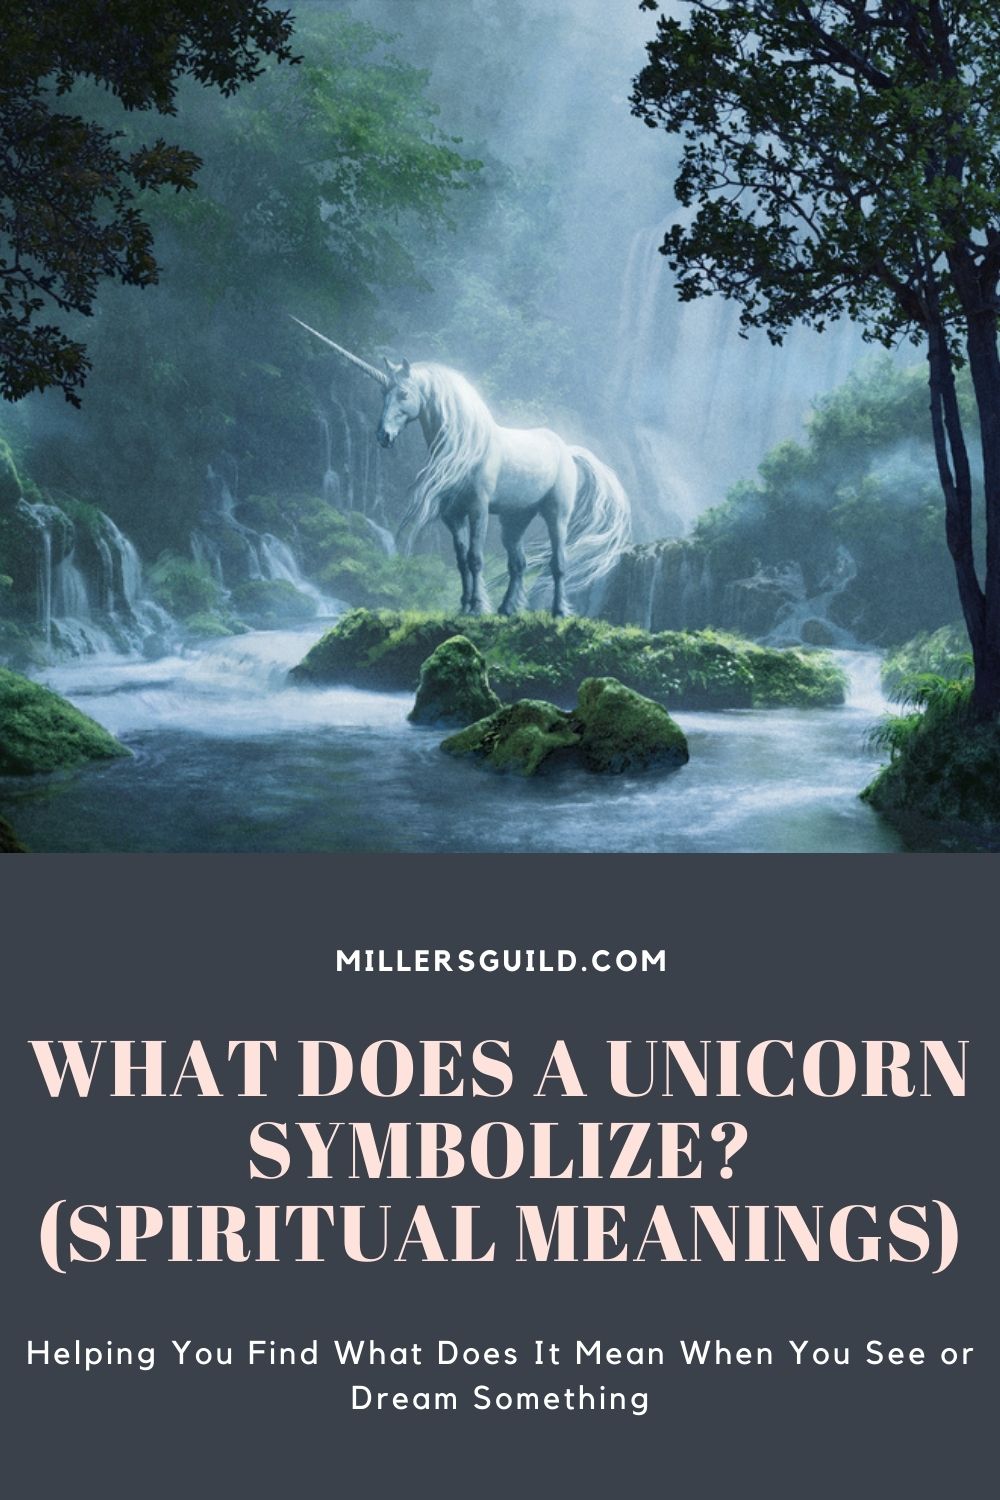 What Does a Unicorn Symbolize? (Spiritual Meanings)